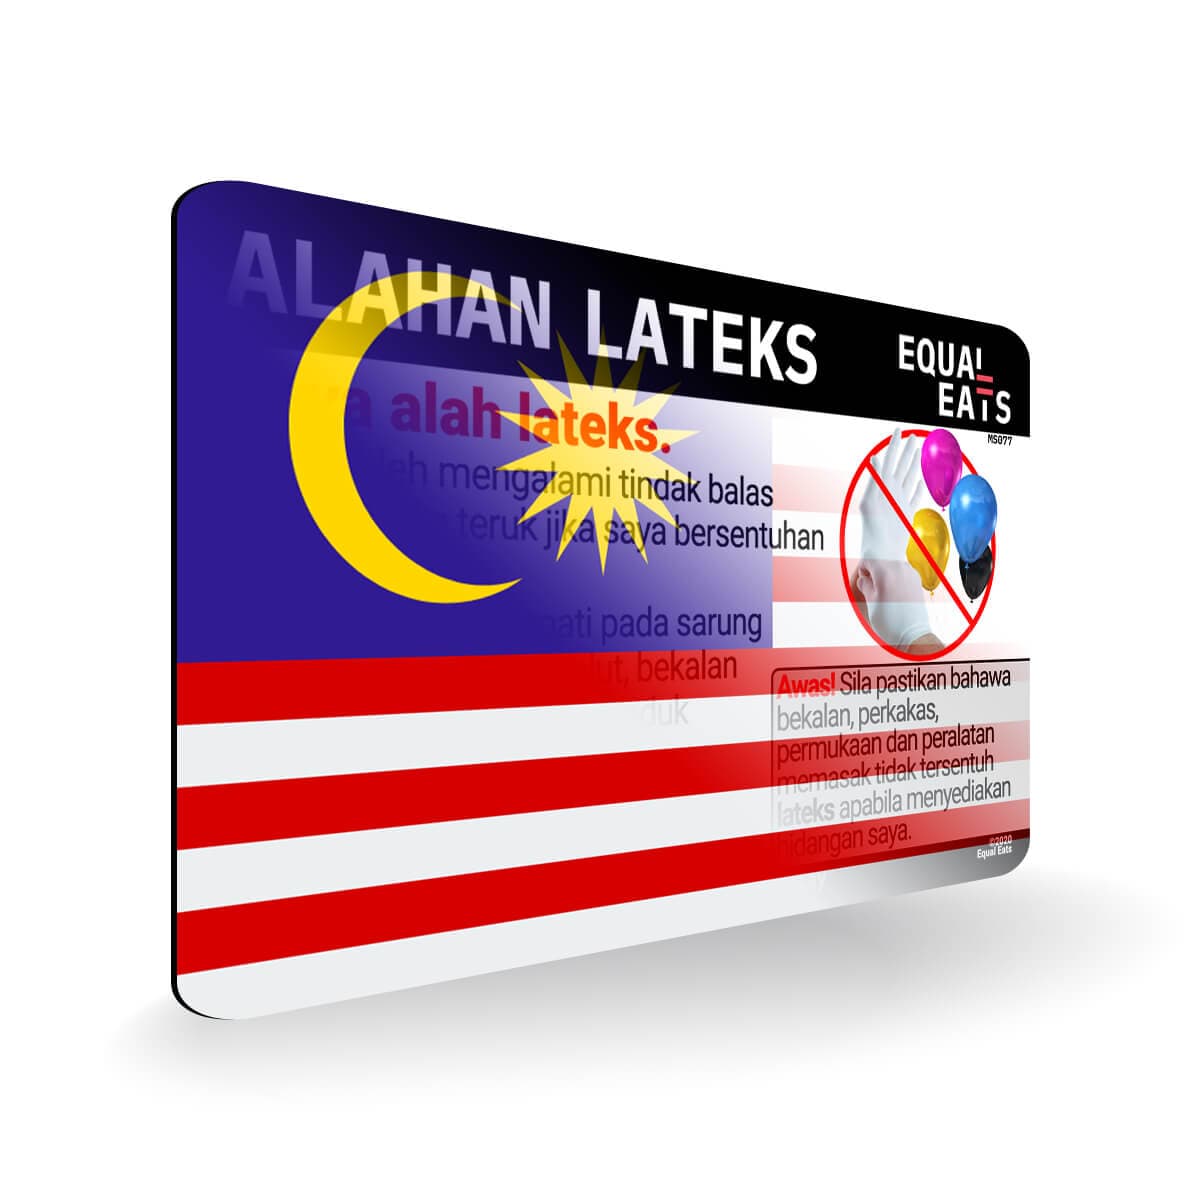 Latex Allergy in Malay. Latex Allergy Travel Card for Malaysia